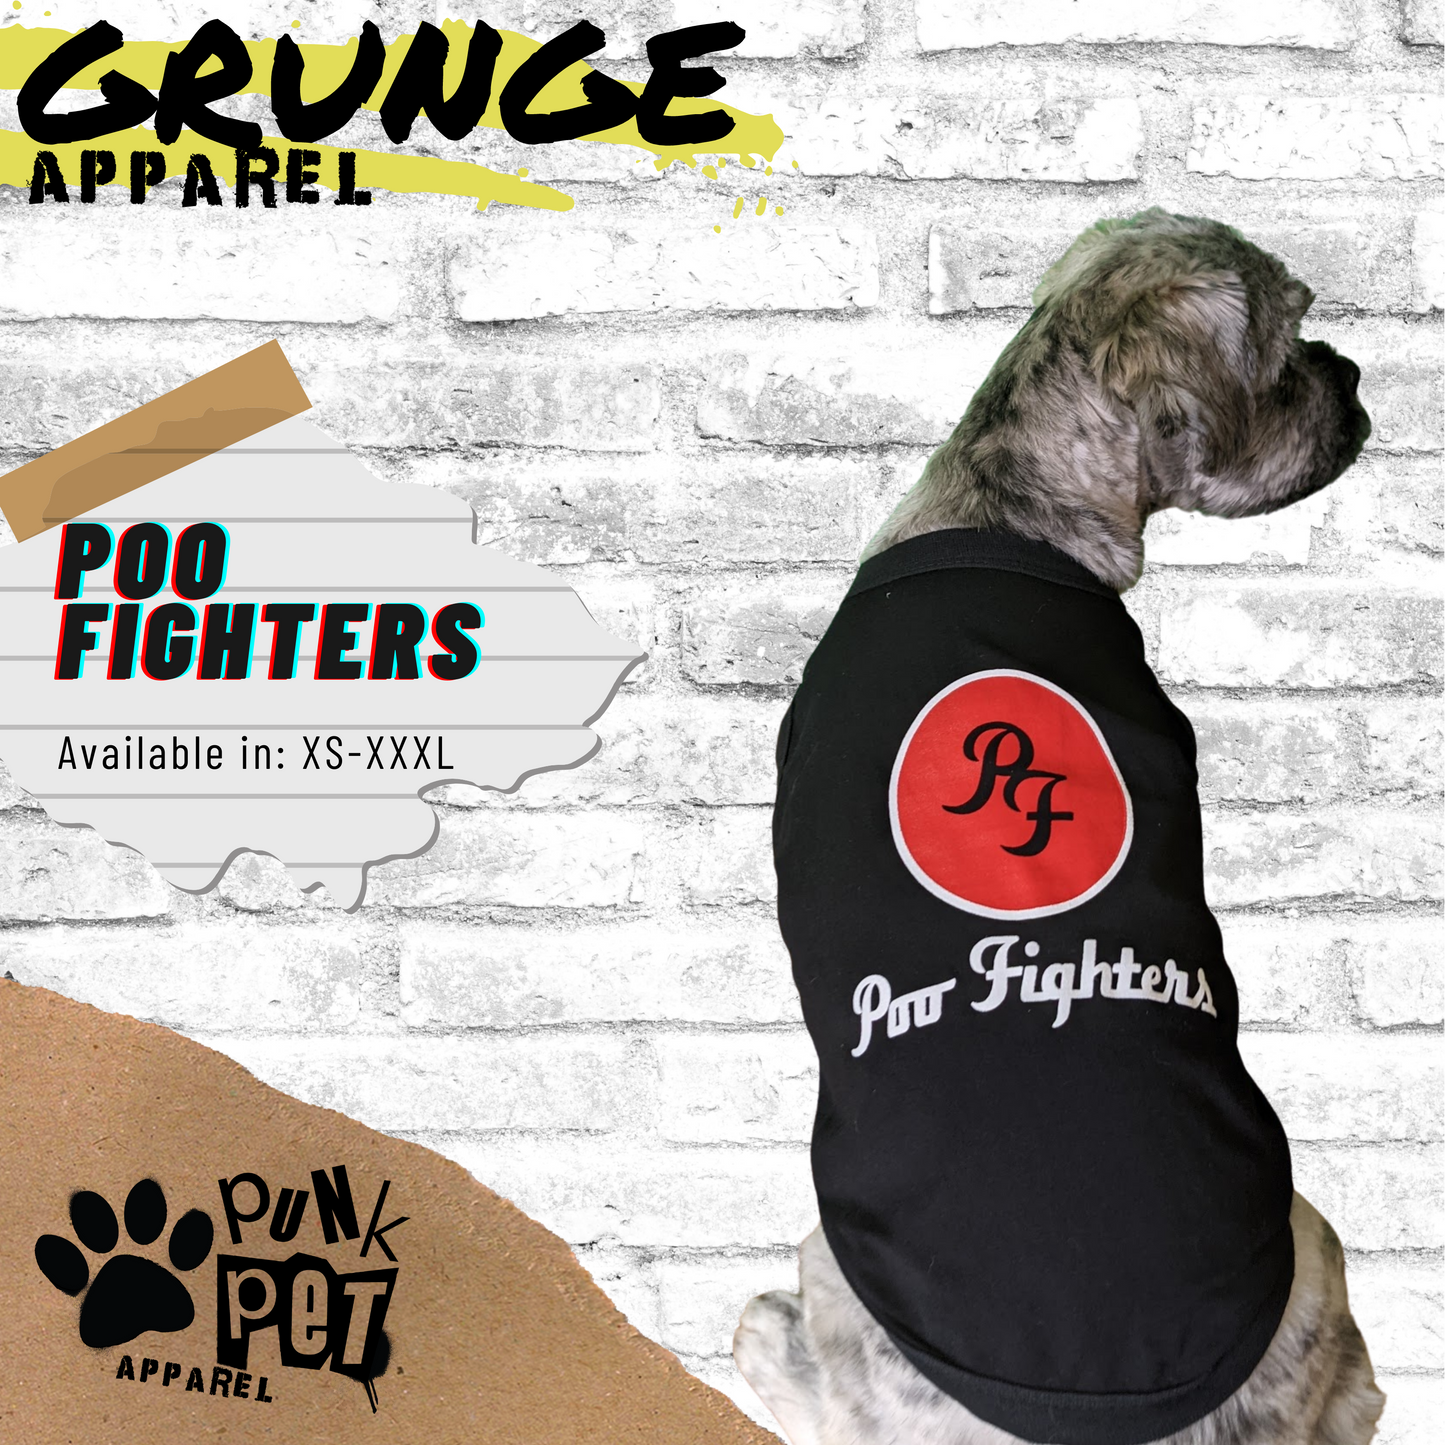 Poo Fighters